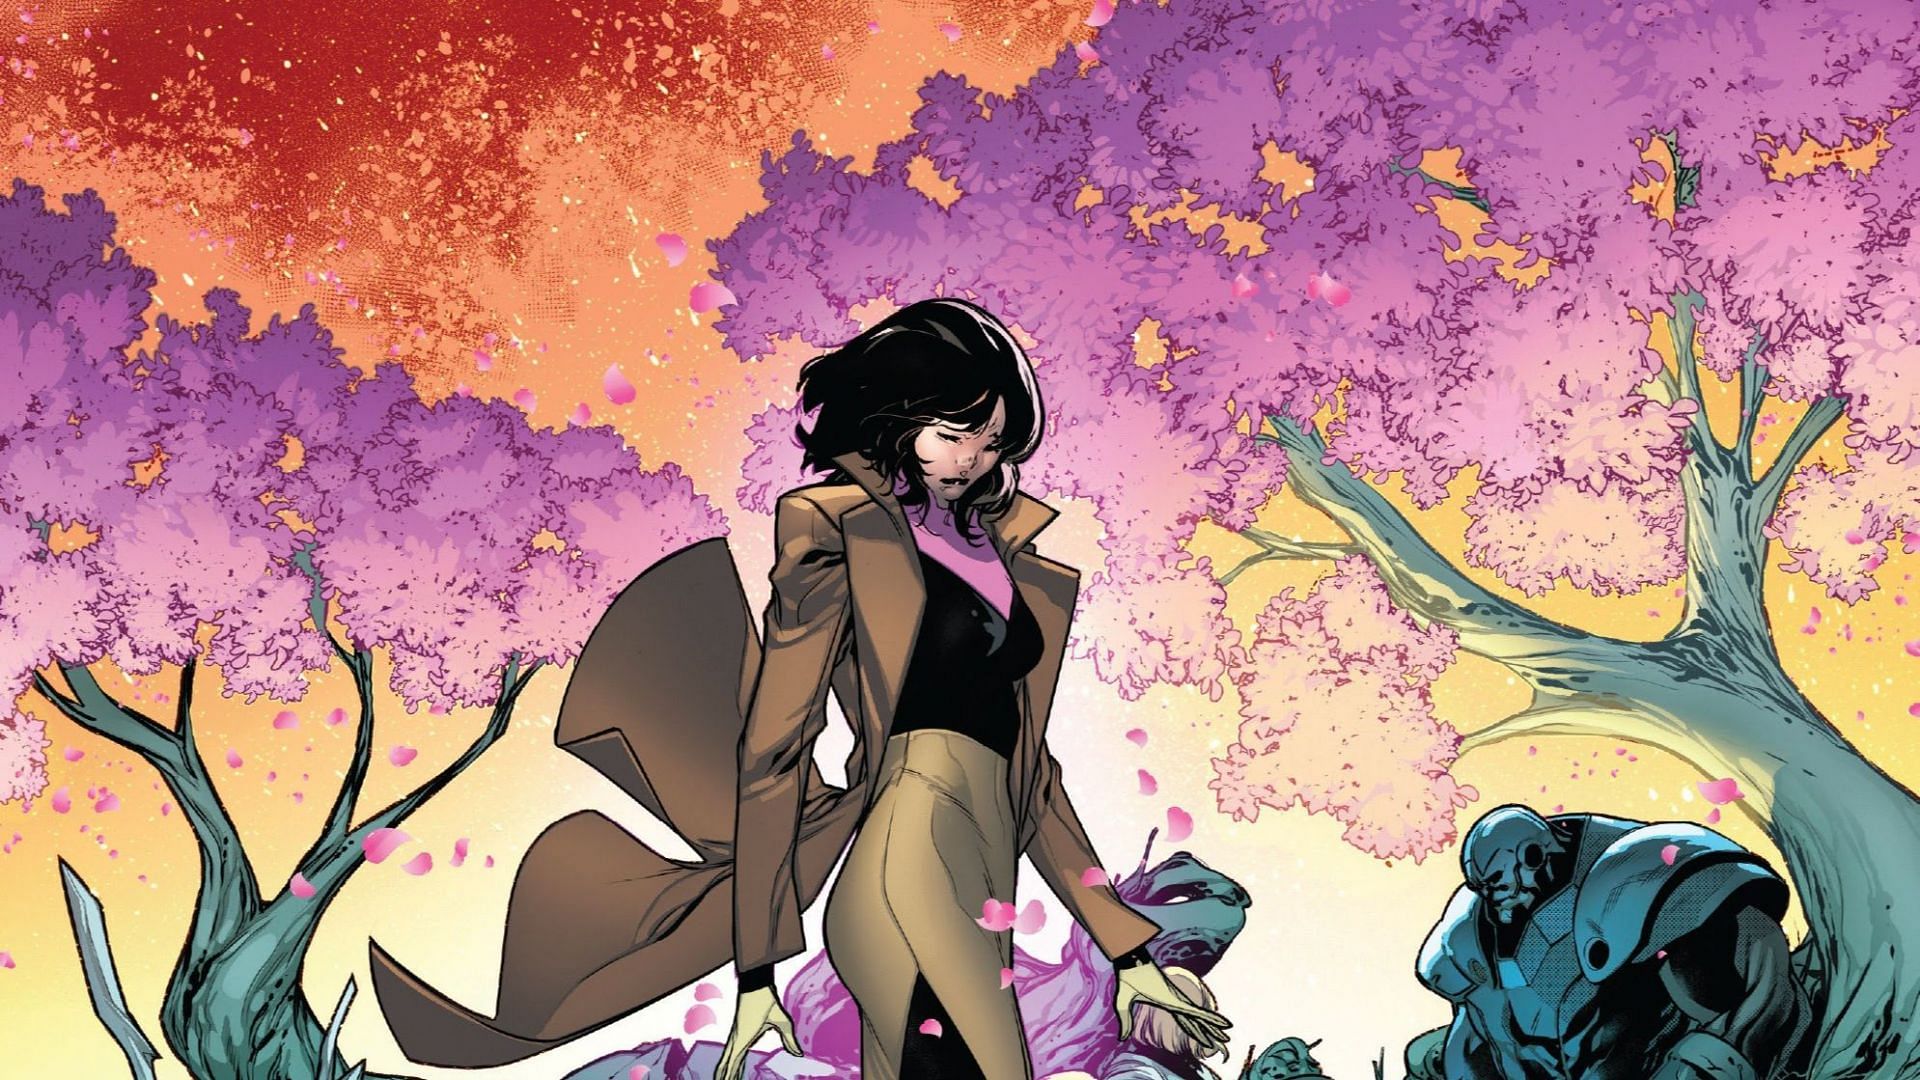 Moira MacTaggert is a prominent character in Marvel comics, known for her involvement with the X-Men. (Image Via Marvel)